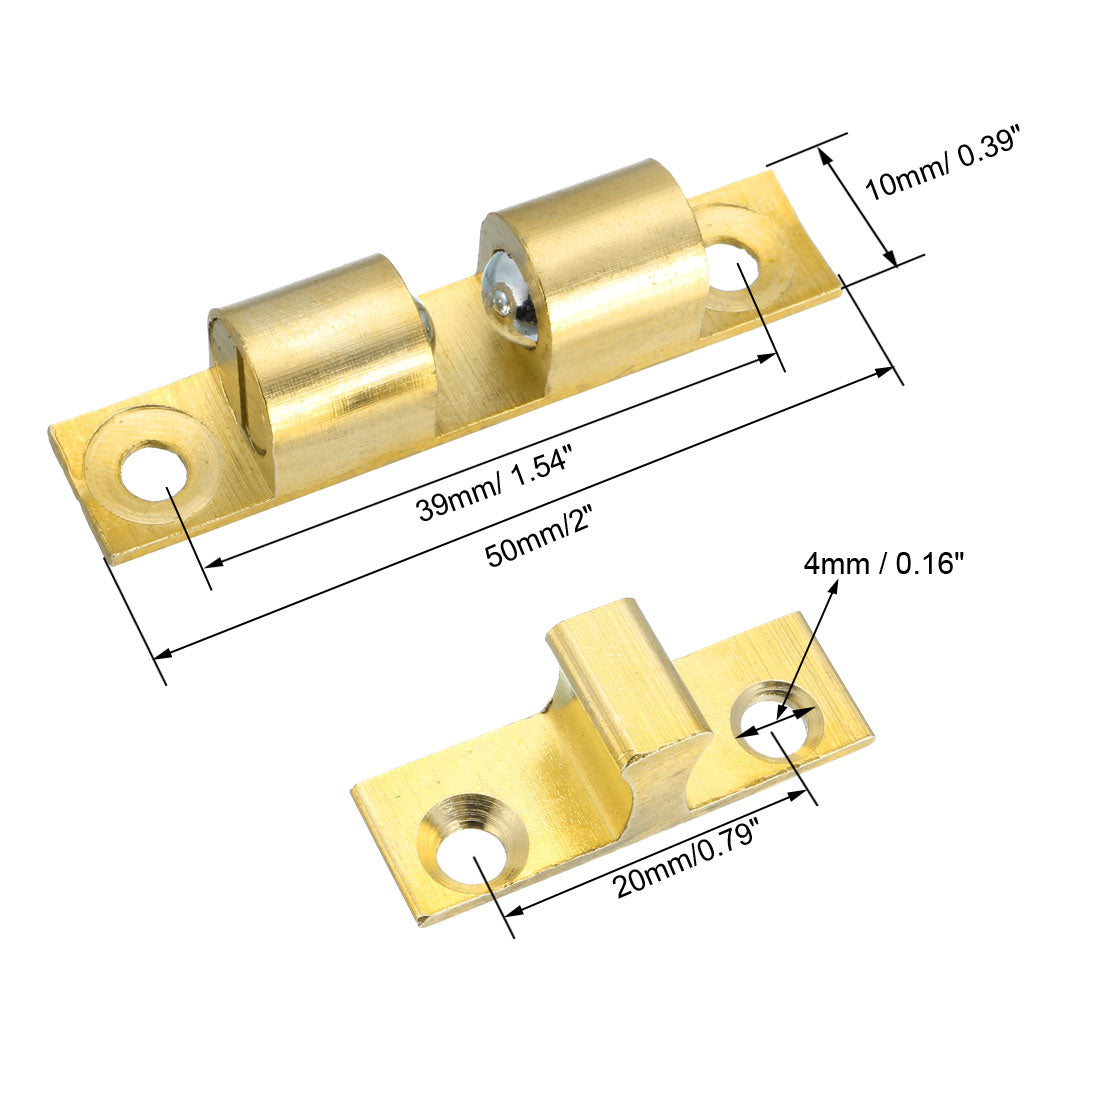 uxcell Uxcell Cabinet Door Closet Brass Double Ball Catch Tension Latch 50mm L Gold Tone